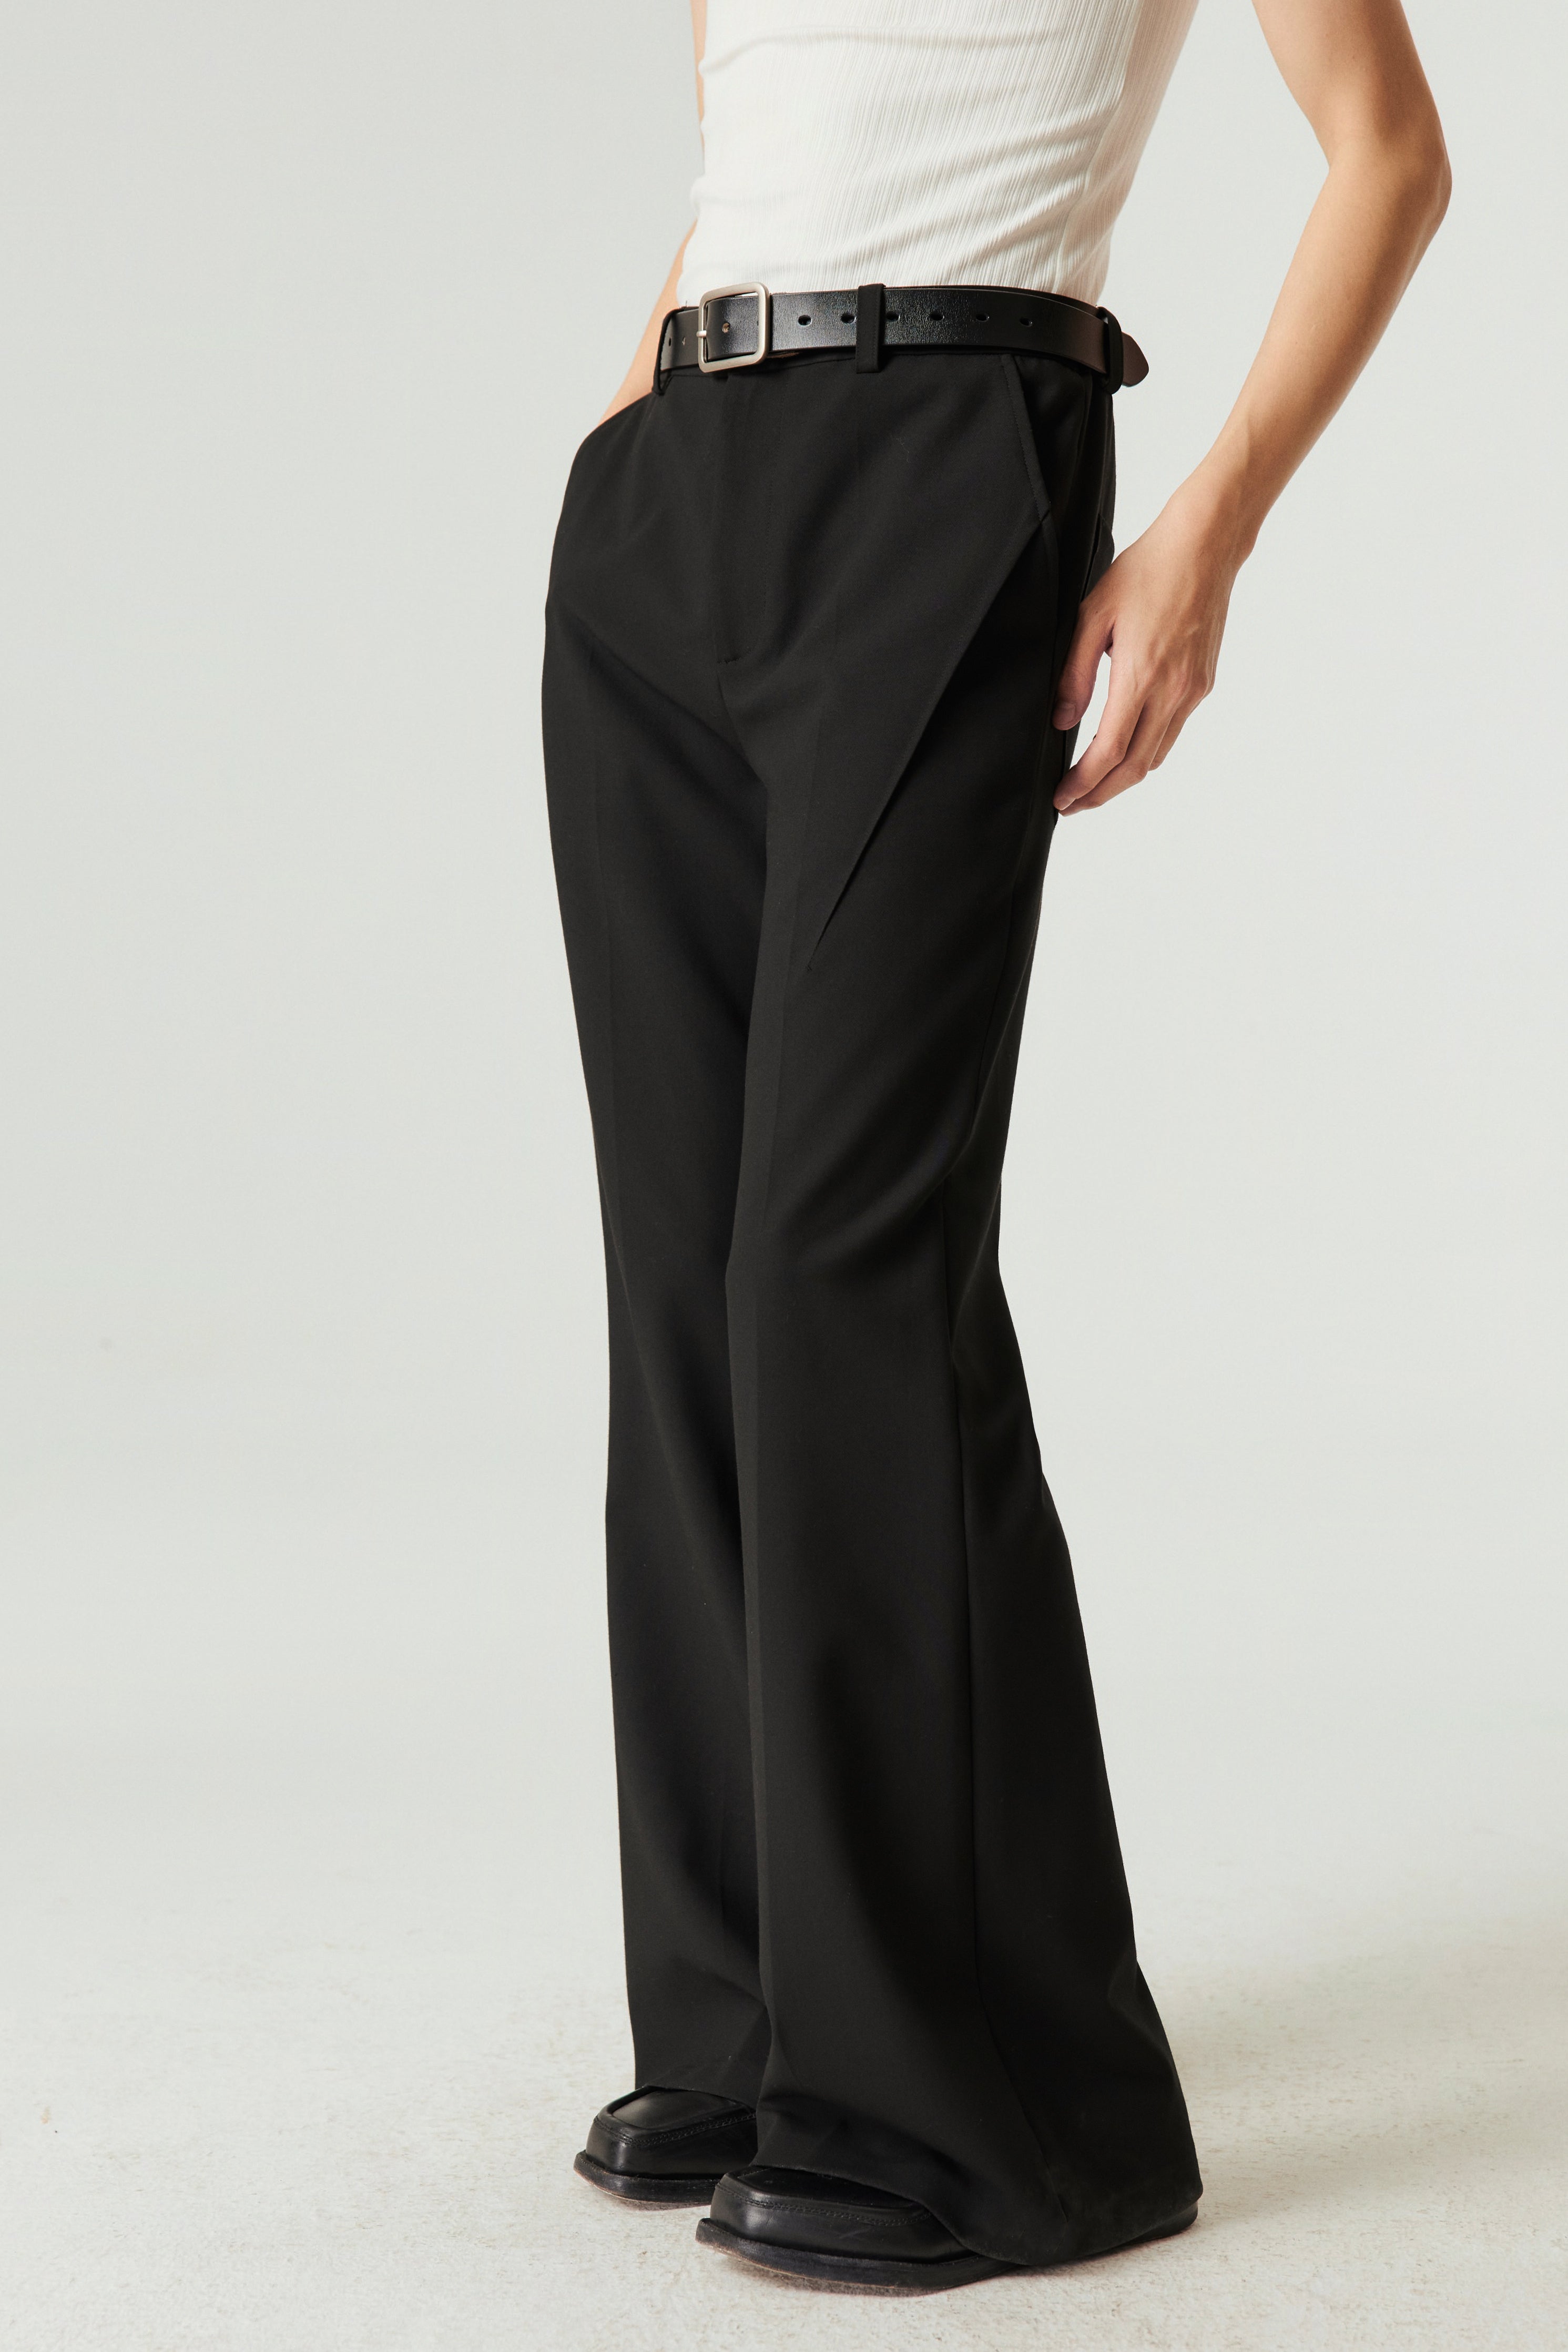 SIMPLE PROJECT MIXED FABRIC FLARE TROUSERS